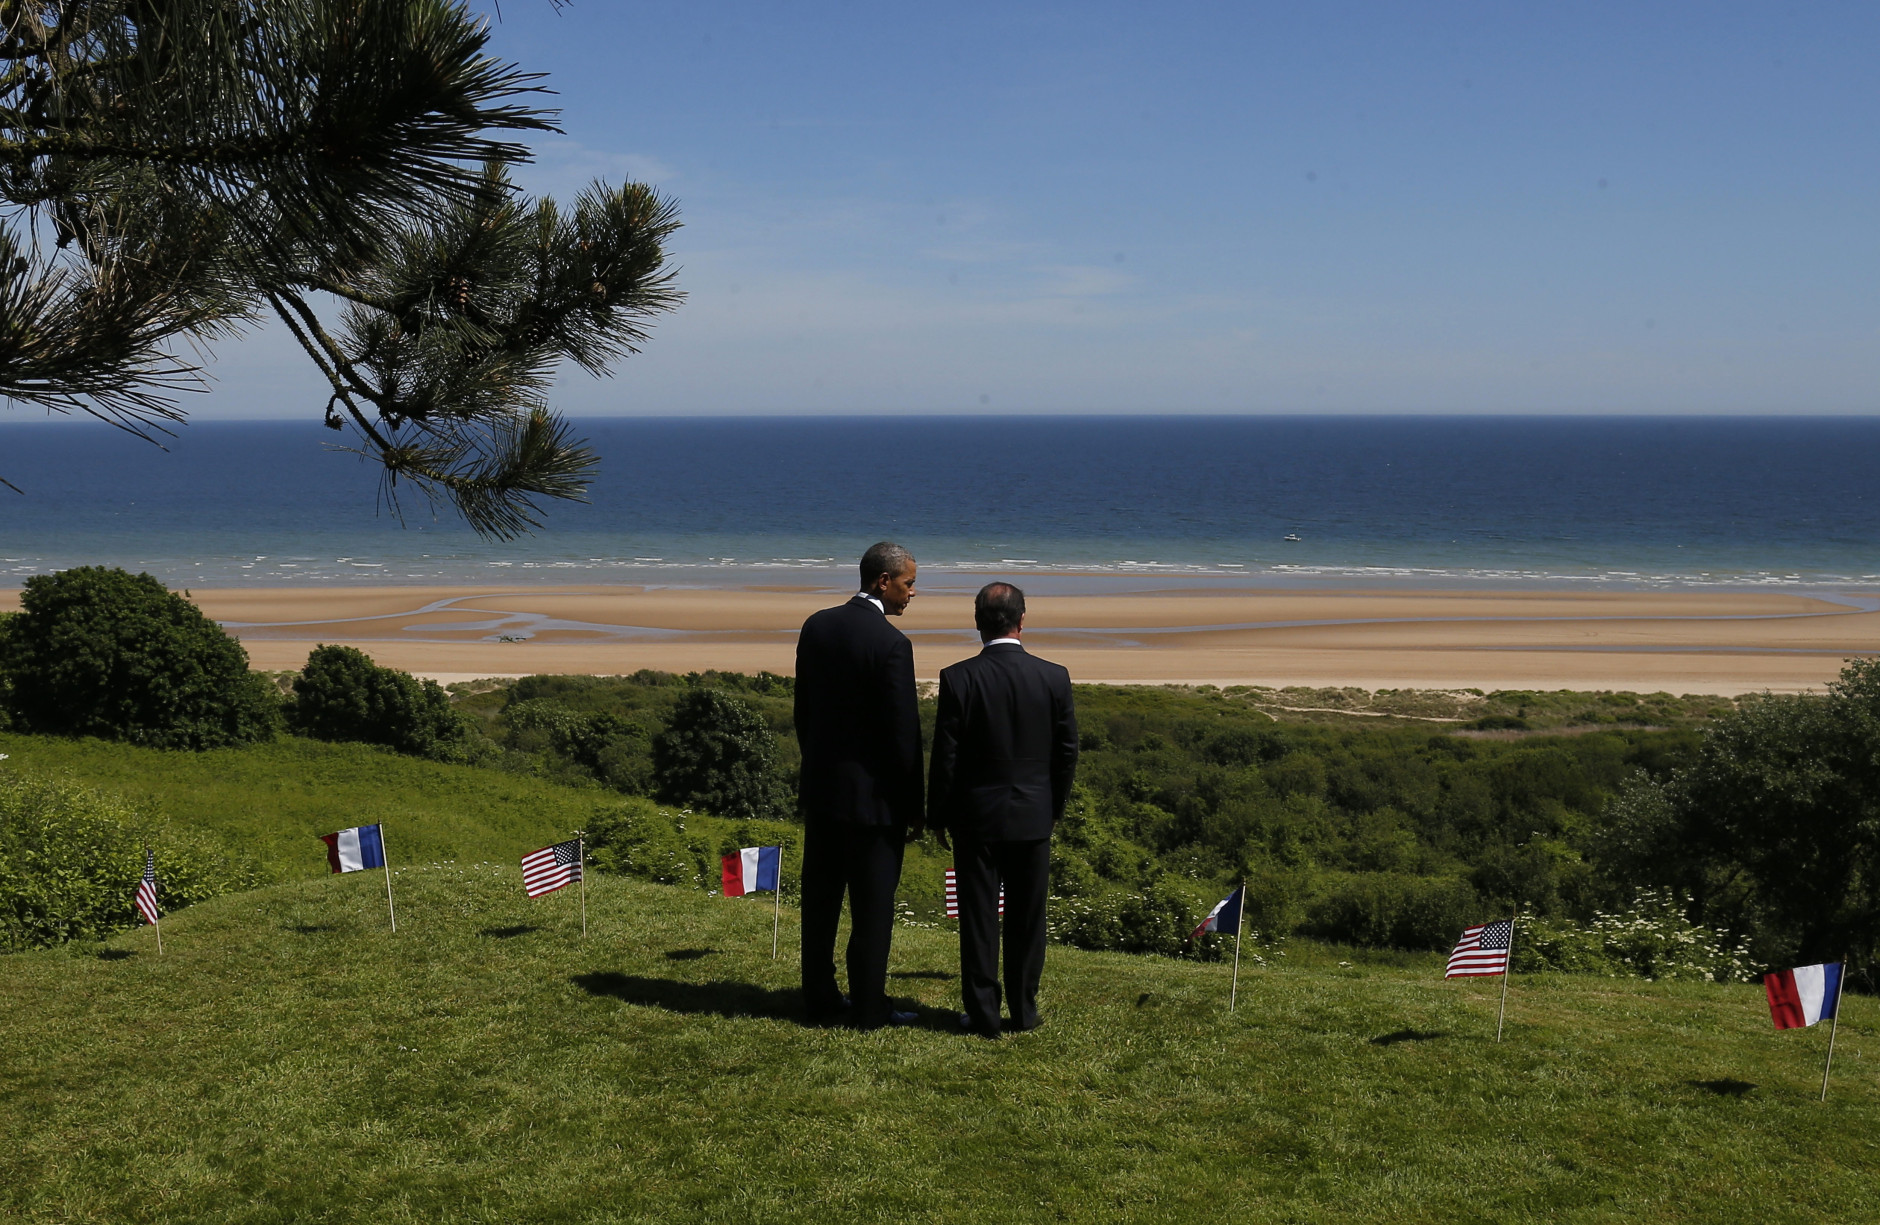 FOR USE AS DESIRED, YEAR END PHOTOS - FILE - U.S. President Barack Obama and French President Francois Hollande look out at Omaha Beach, one of the sites of the Allied soldiers beach landings, at Normandy American Cemetery as they participate in the 70th anniversary of D-Day in Colleville sur Mer in Normandy, France, Friday, June 6, 2014. (AP Photo/Charles Dharapak, File)